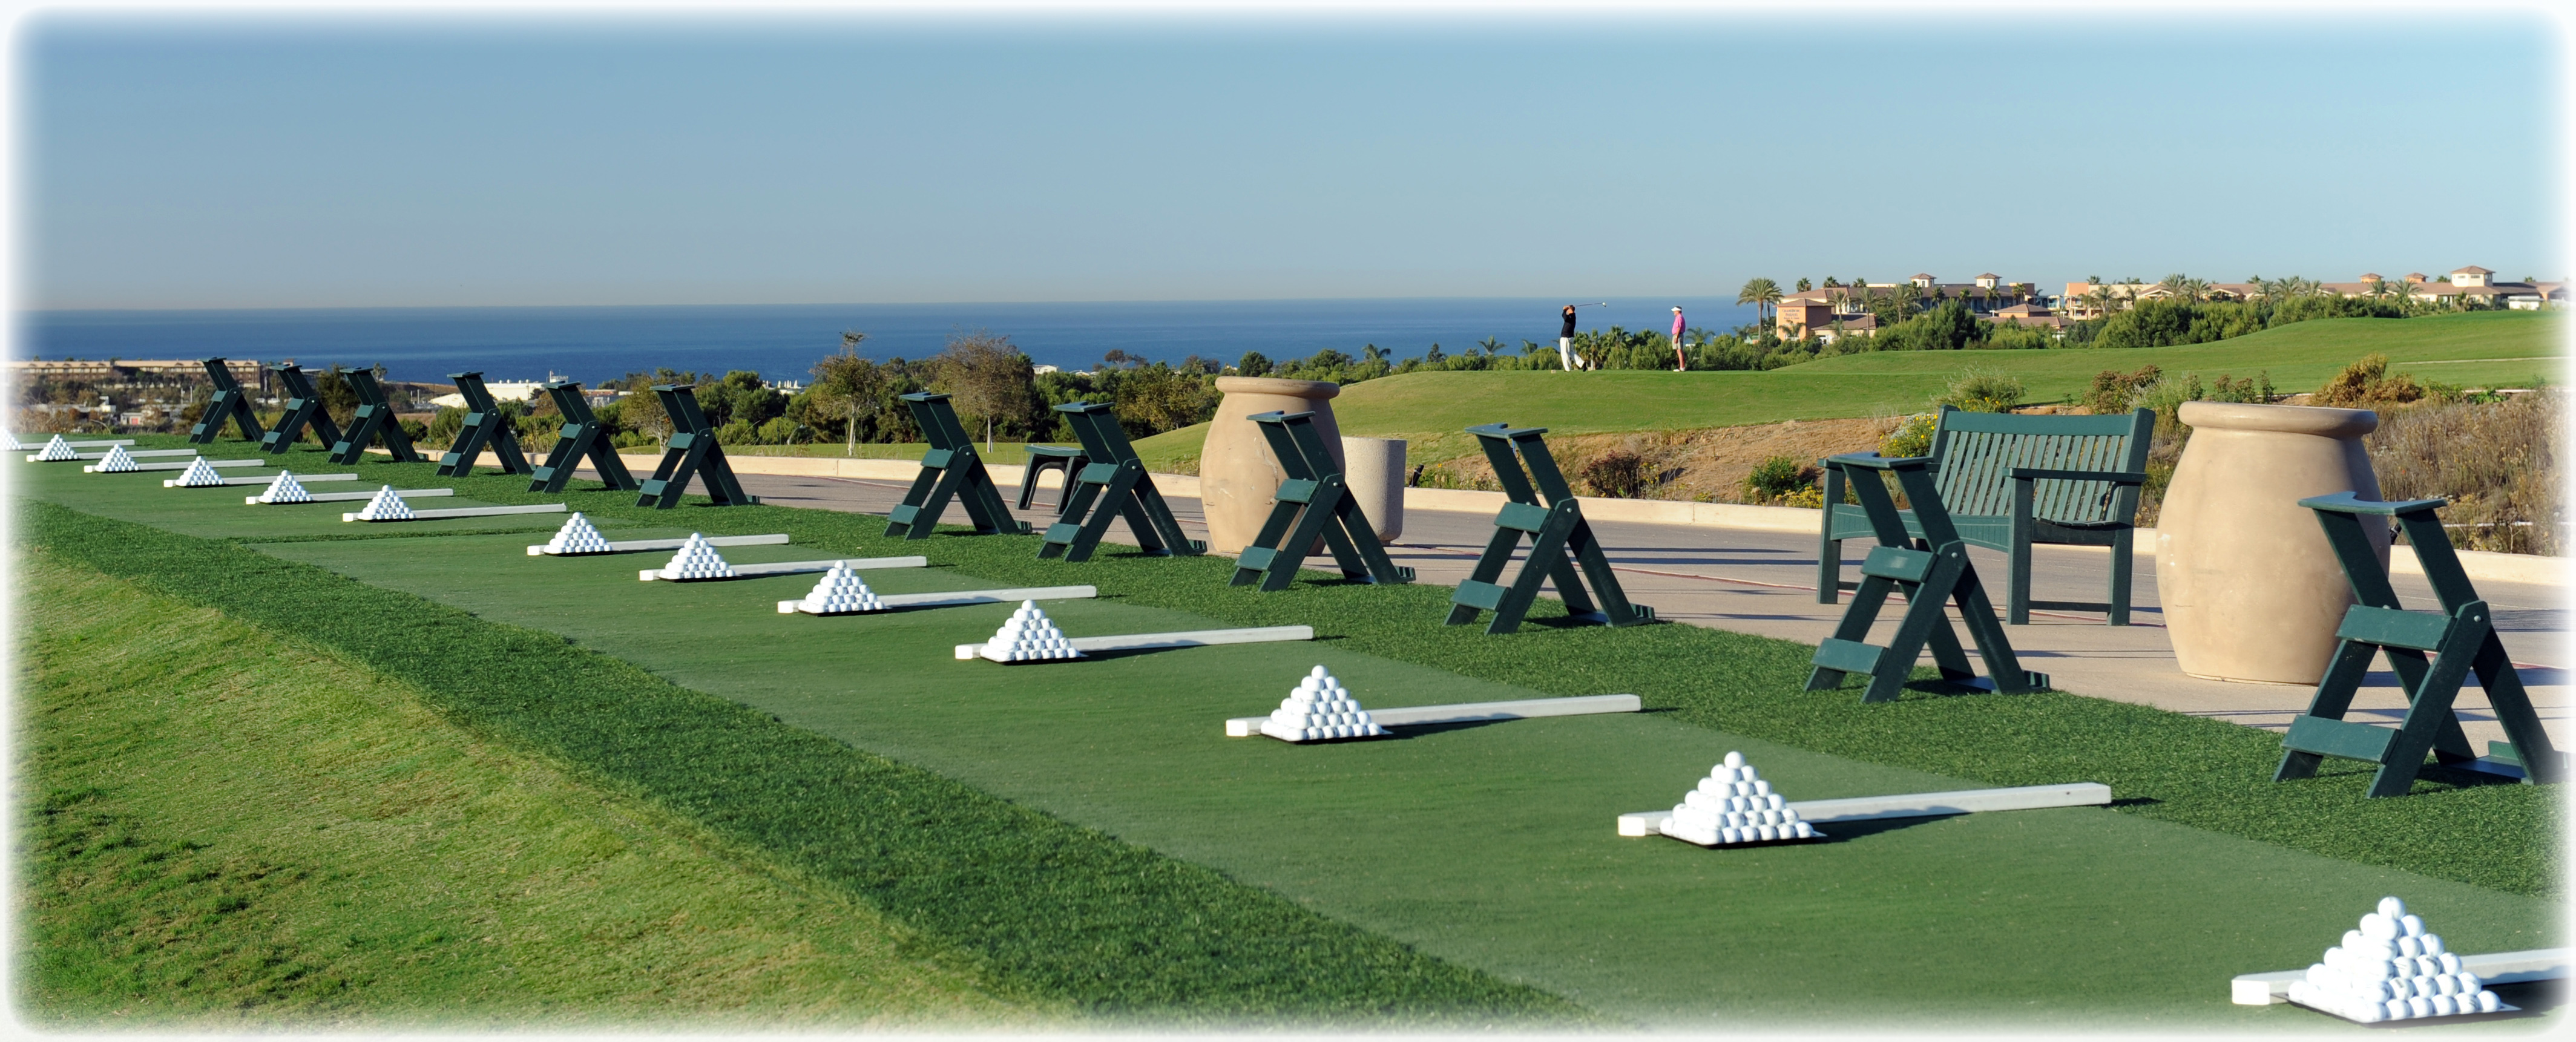 The Crossings at Carlsbad - Golf Course, Wedding Venue and Restaurant